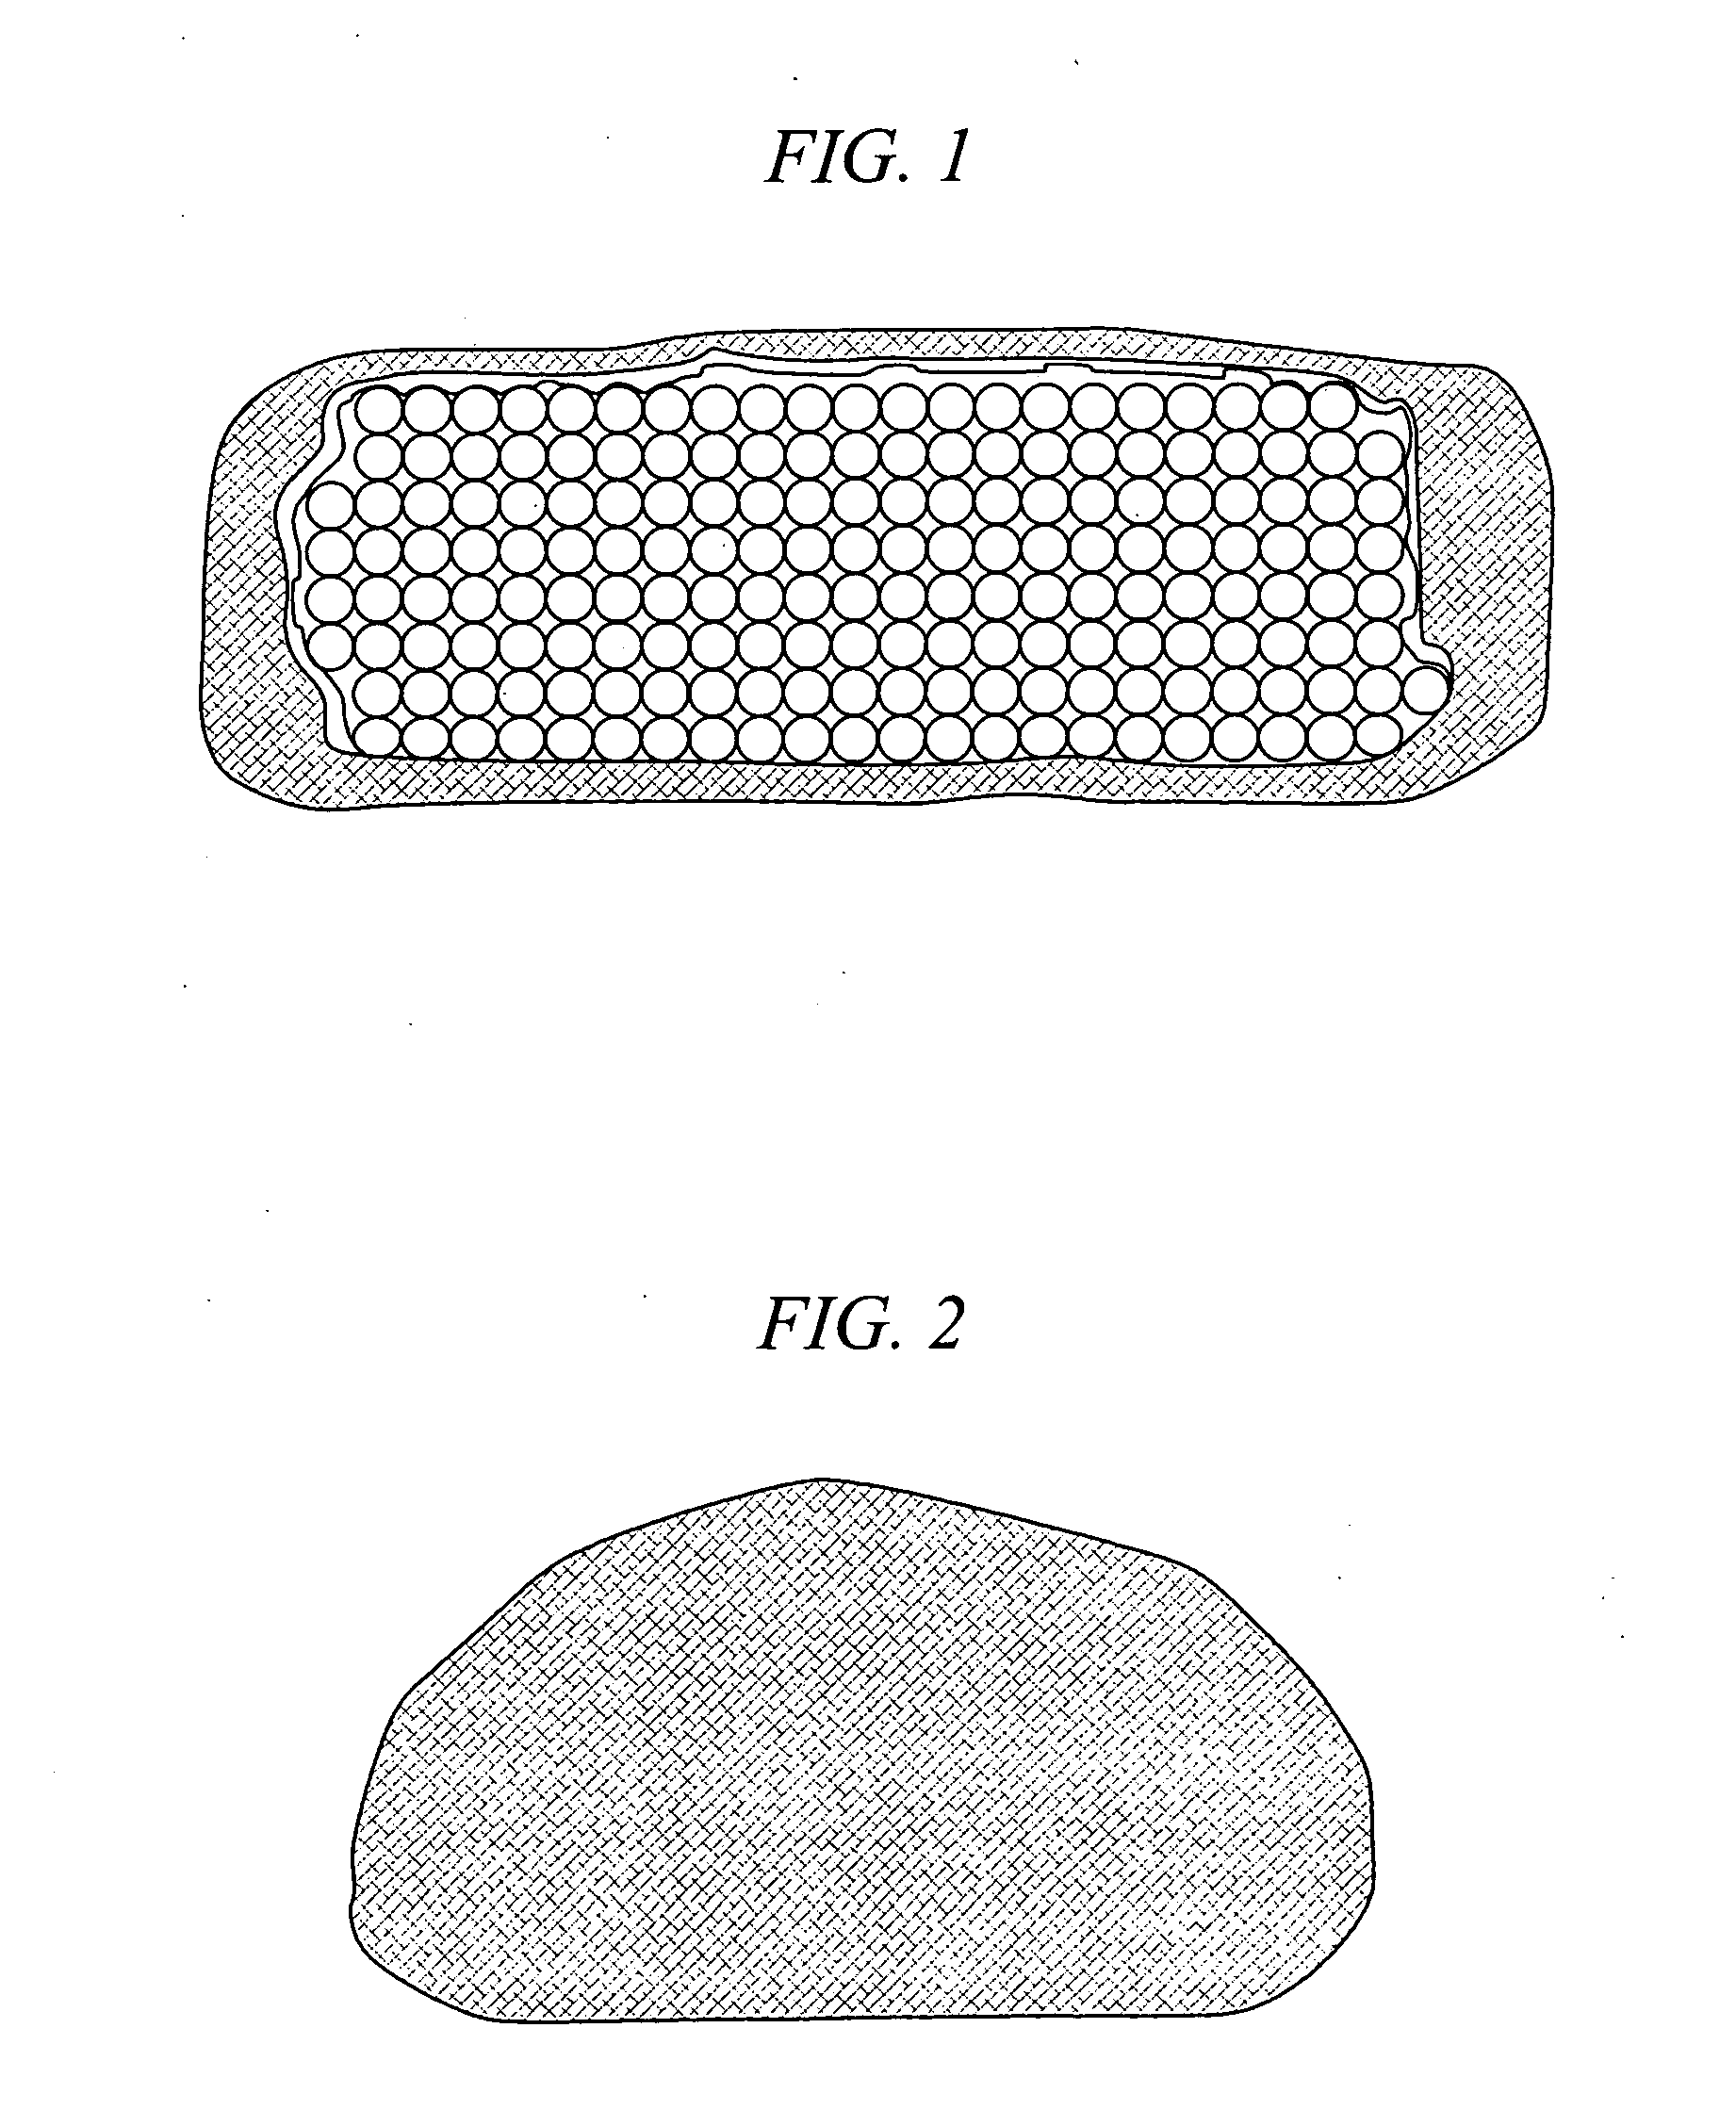 Prostheses for spine discs having fusion capability